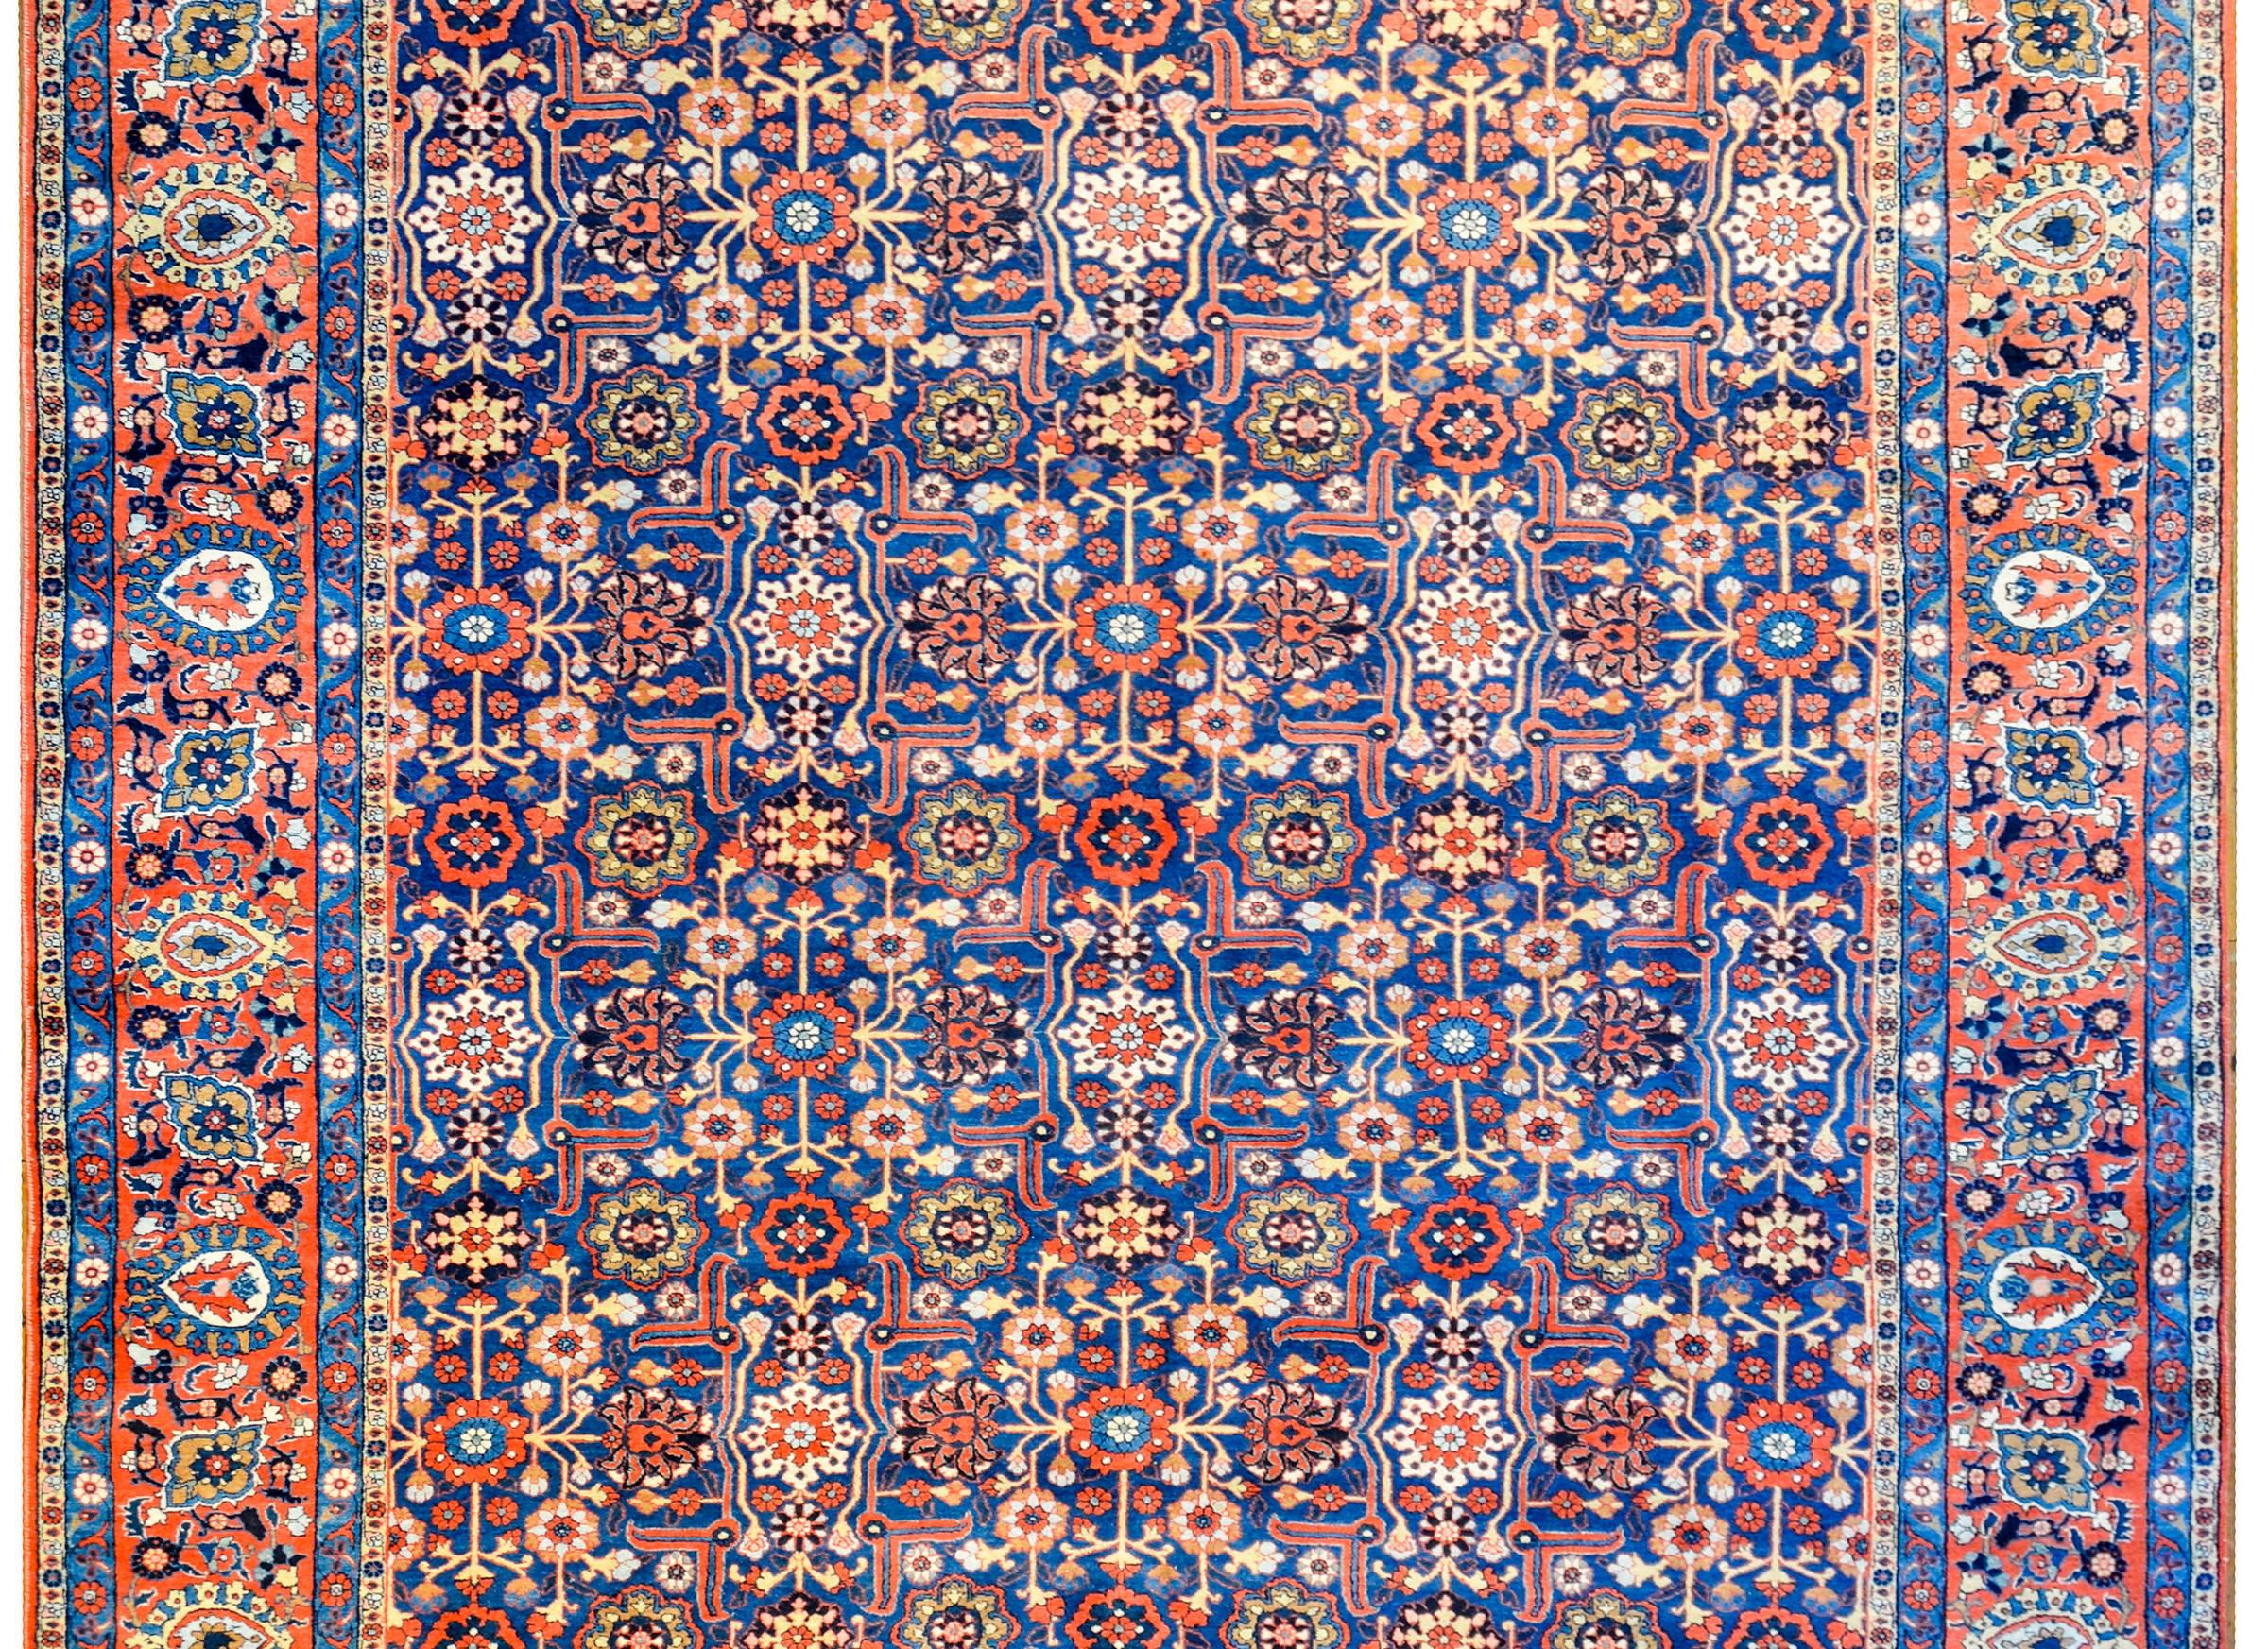 A wonderful early 20th century Persian Yazd rug with a trellis floral pattern woven in a rich crimson, gold, and cream colored vegetable dyed wool on a dark indigo background. The border is extraordinary and complex with a wide floral and vine